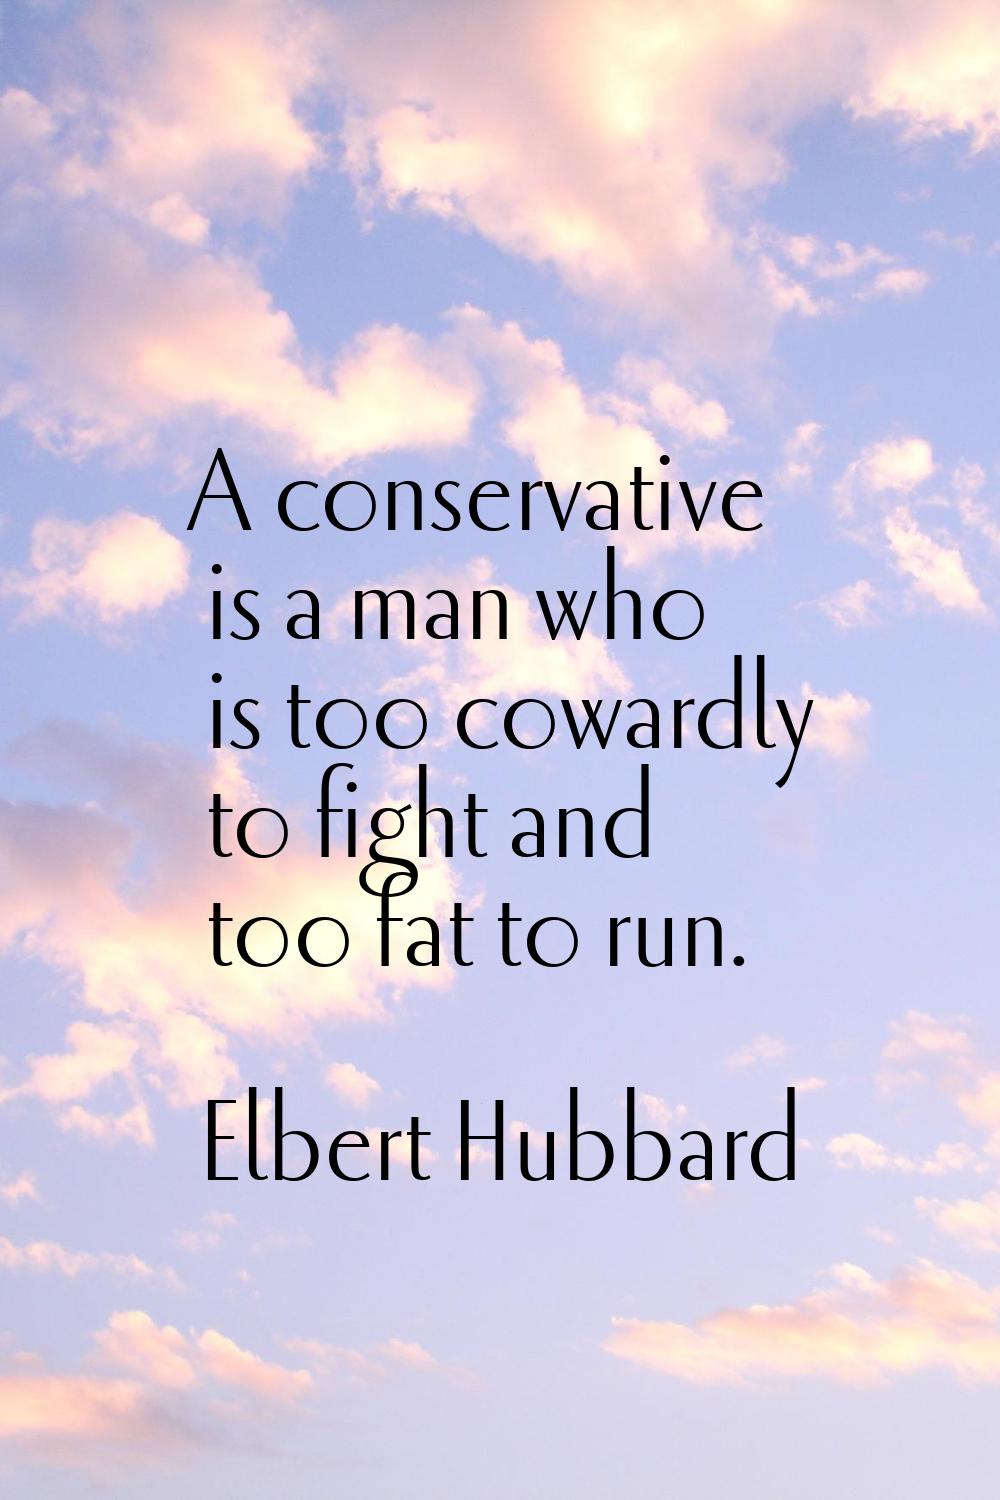 A conservative is a man who is too cowardly to fight and too fat to run.